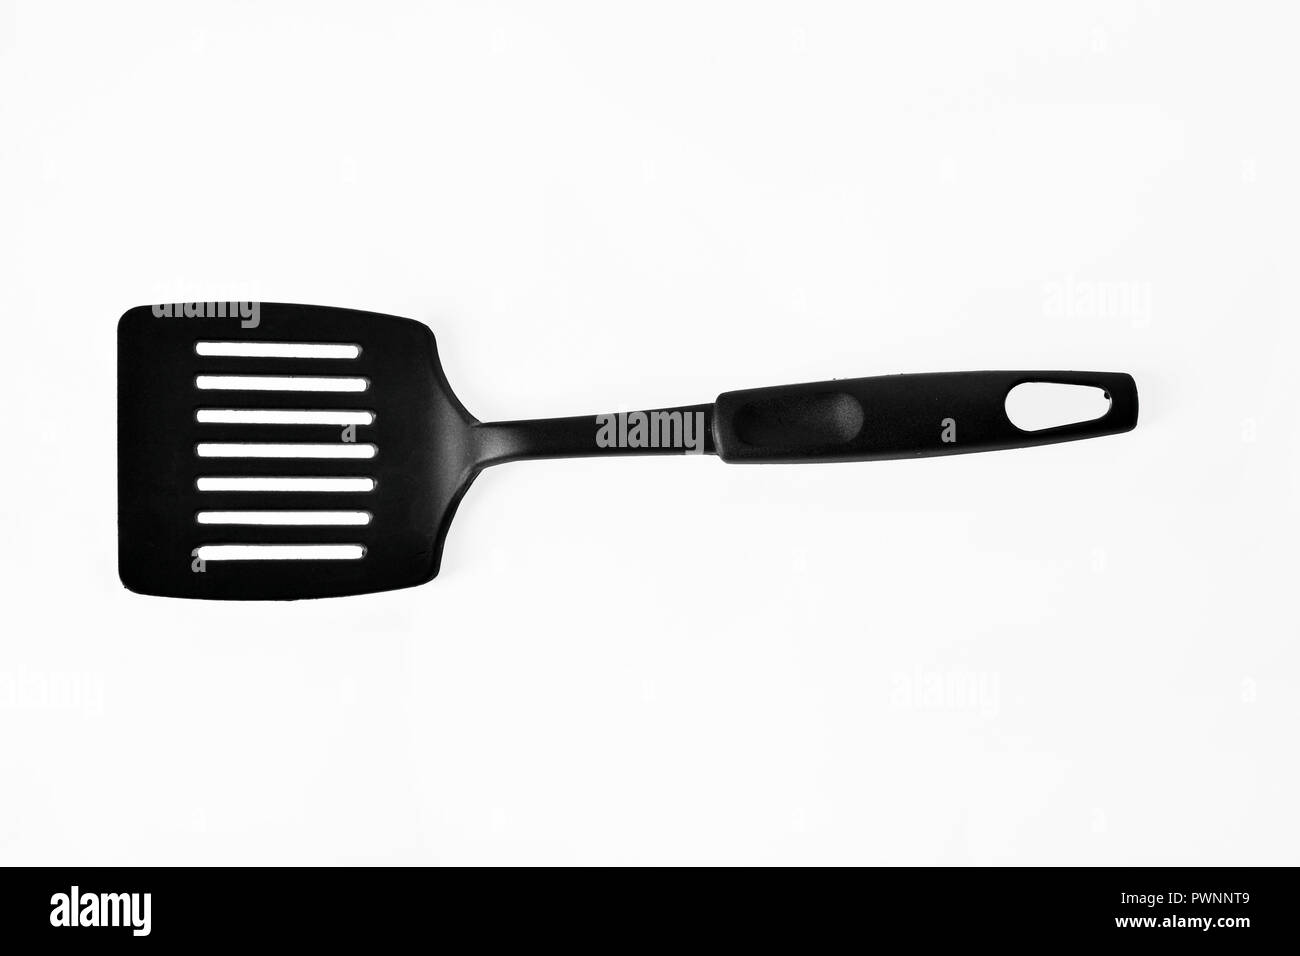 Download Plastic Spatula High Resolution Stock Photography And Images Alamy Yellowimages Mockups